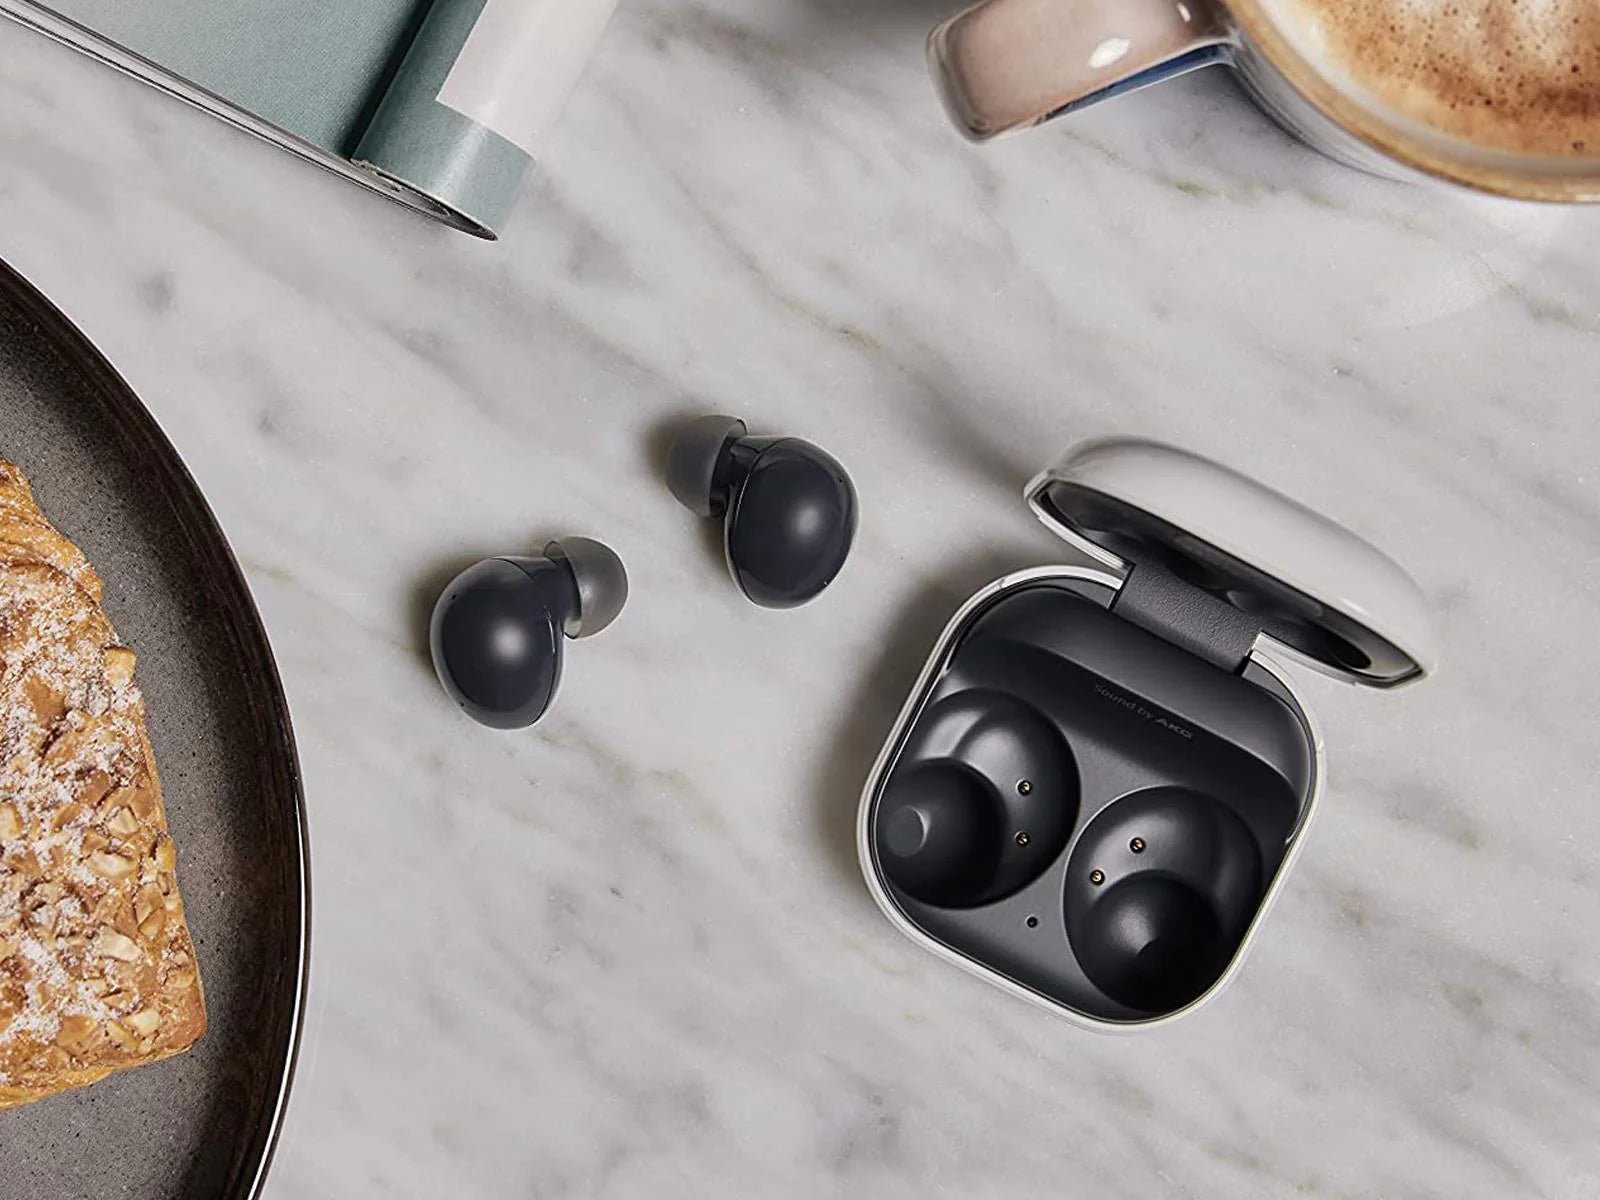 Top view on the Wireless bluetooth Samsung Galaxy Buds2 with Charging Case on table